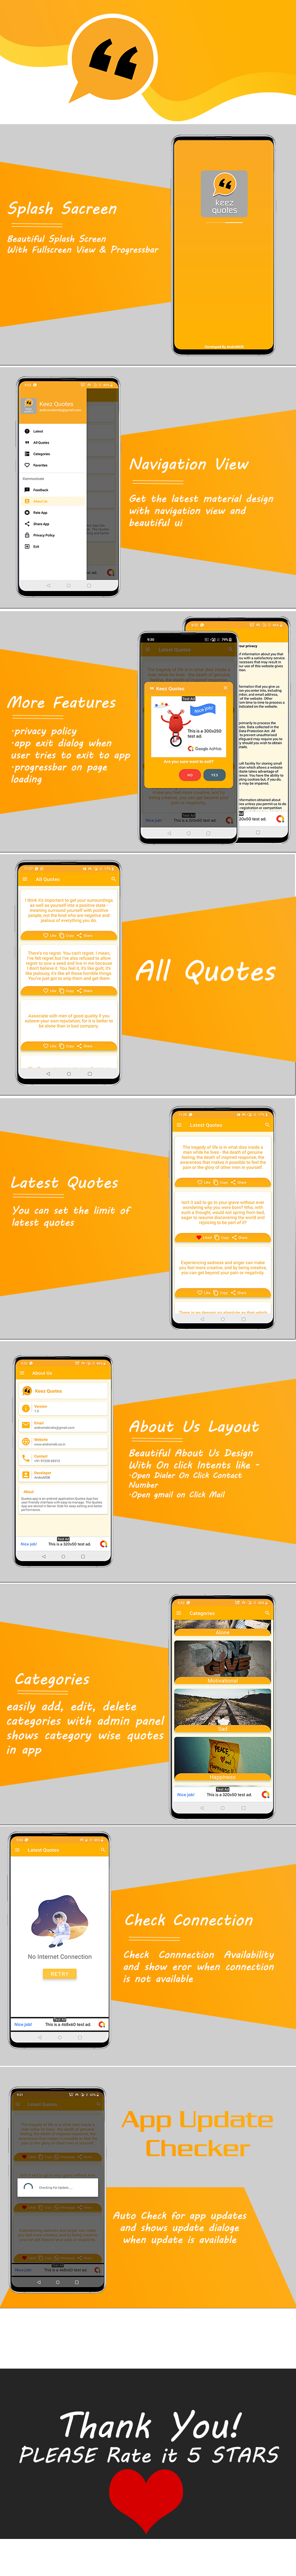 Keez - Android Quotes App WIth Category - Admin Panel - Admob - 1